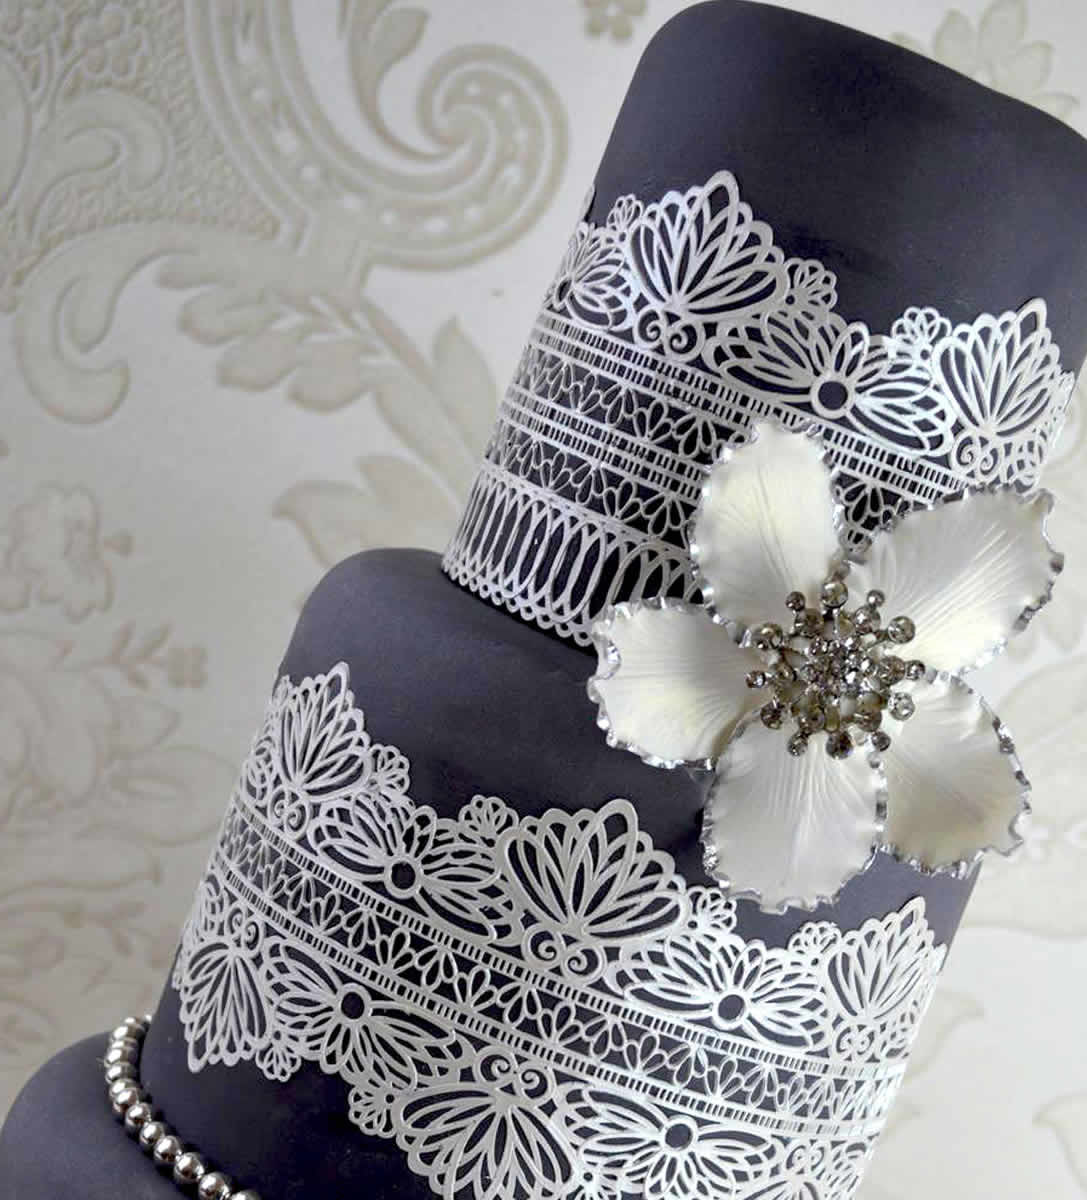 optioneel Ringlet instructeur FAST Shipping Claire Bowman Serenity Cake Lace Mat - Etsy